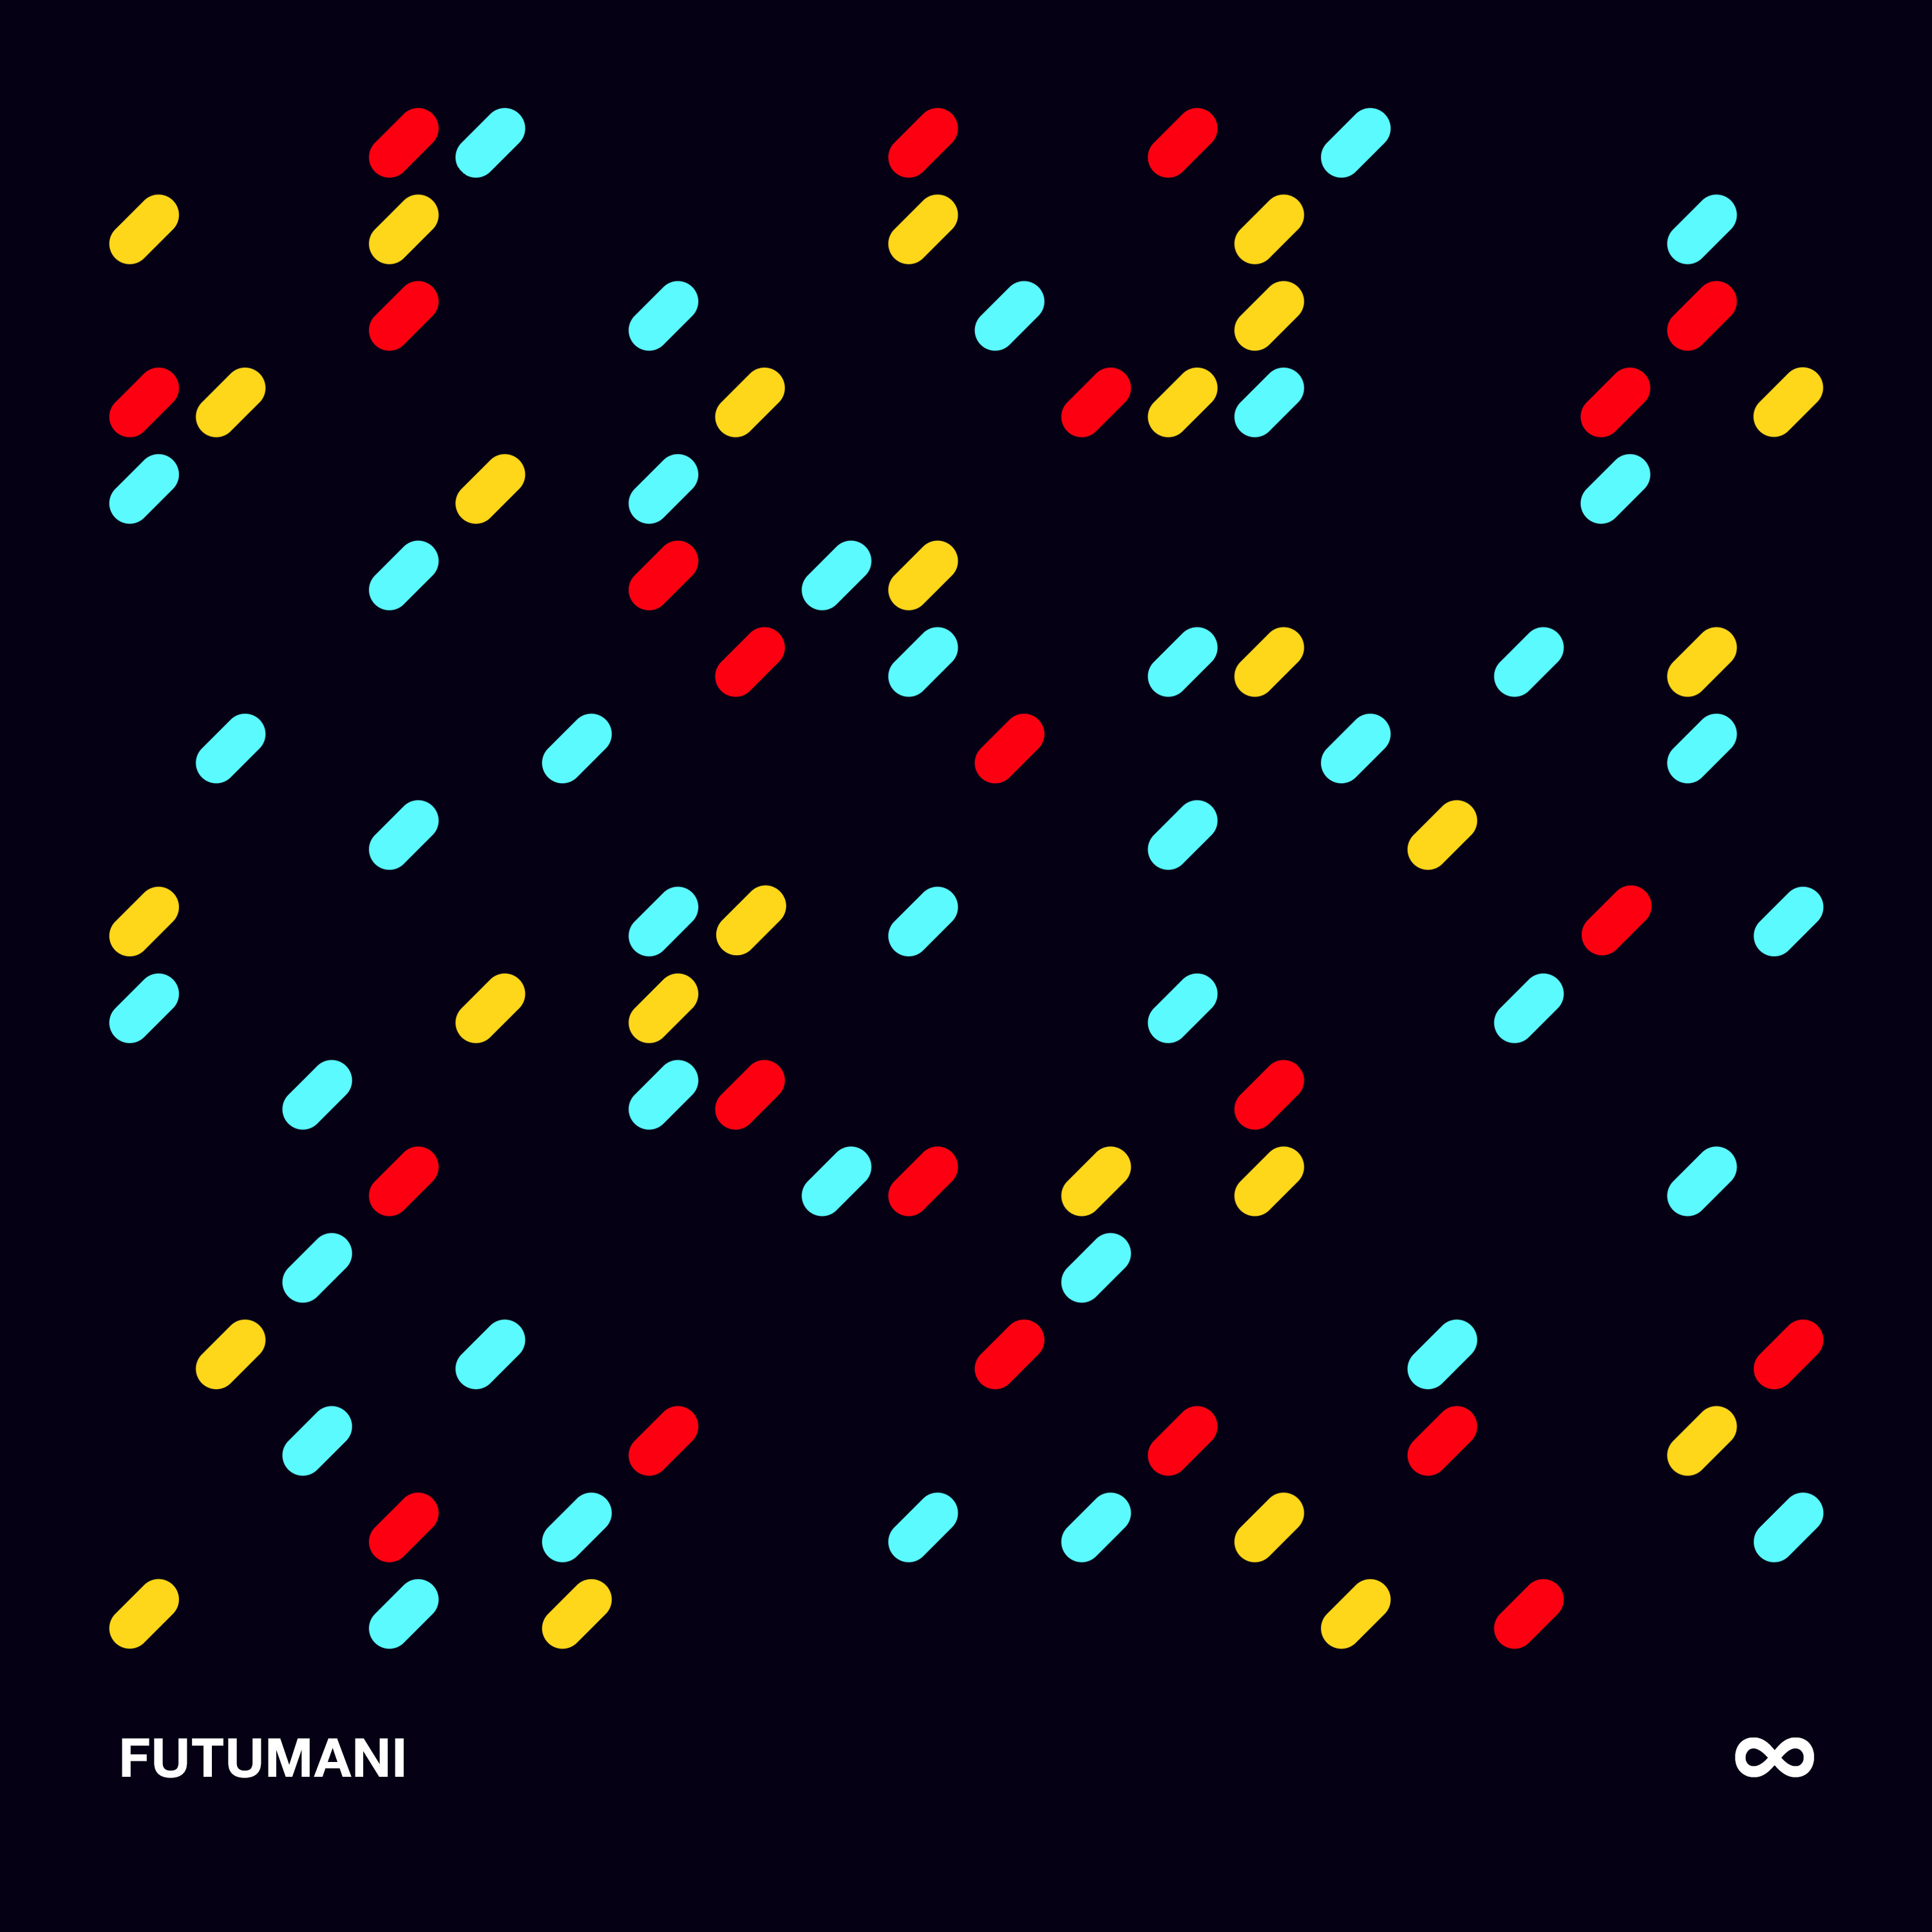 Futumani - Our Eyes Were the Eyes of the Universe (8비트, 신남, 순수, 즐거움)